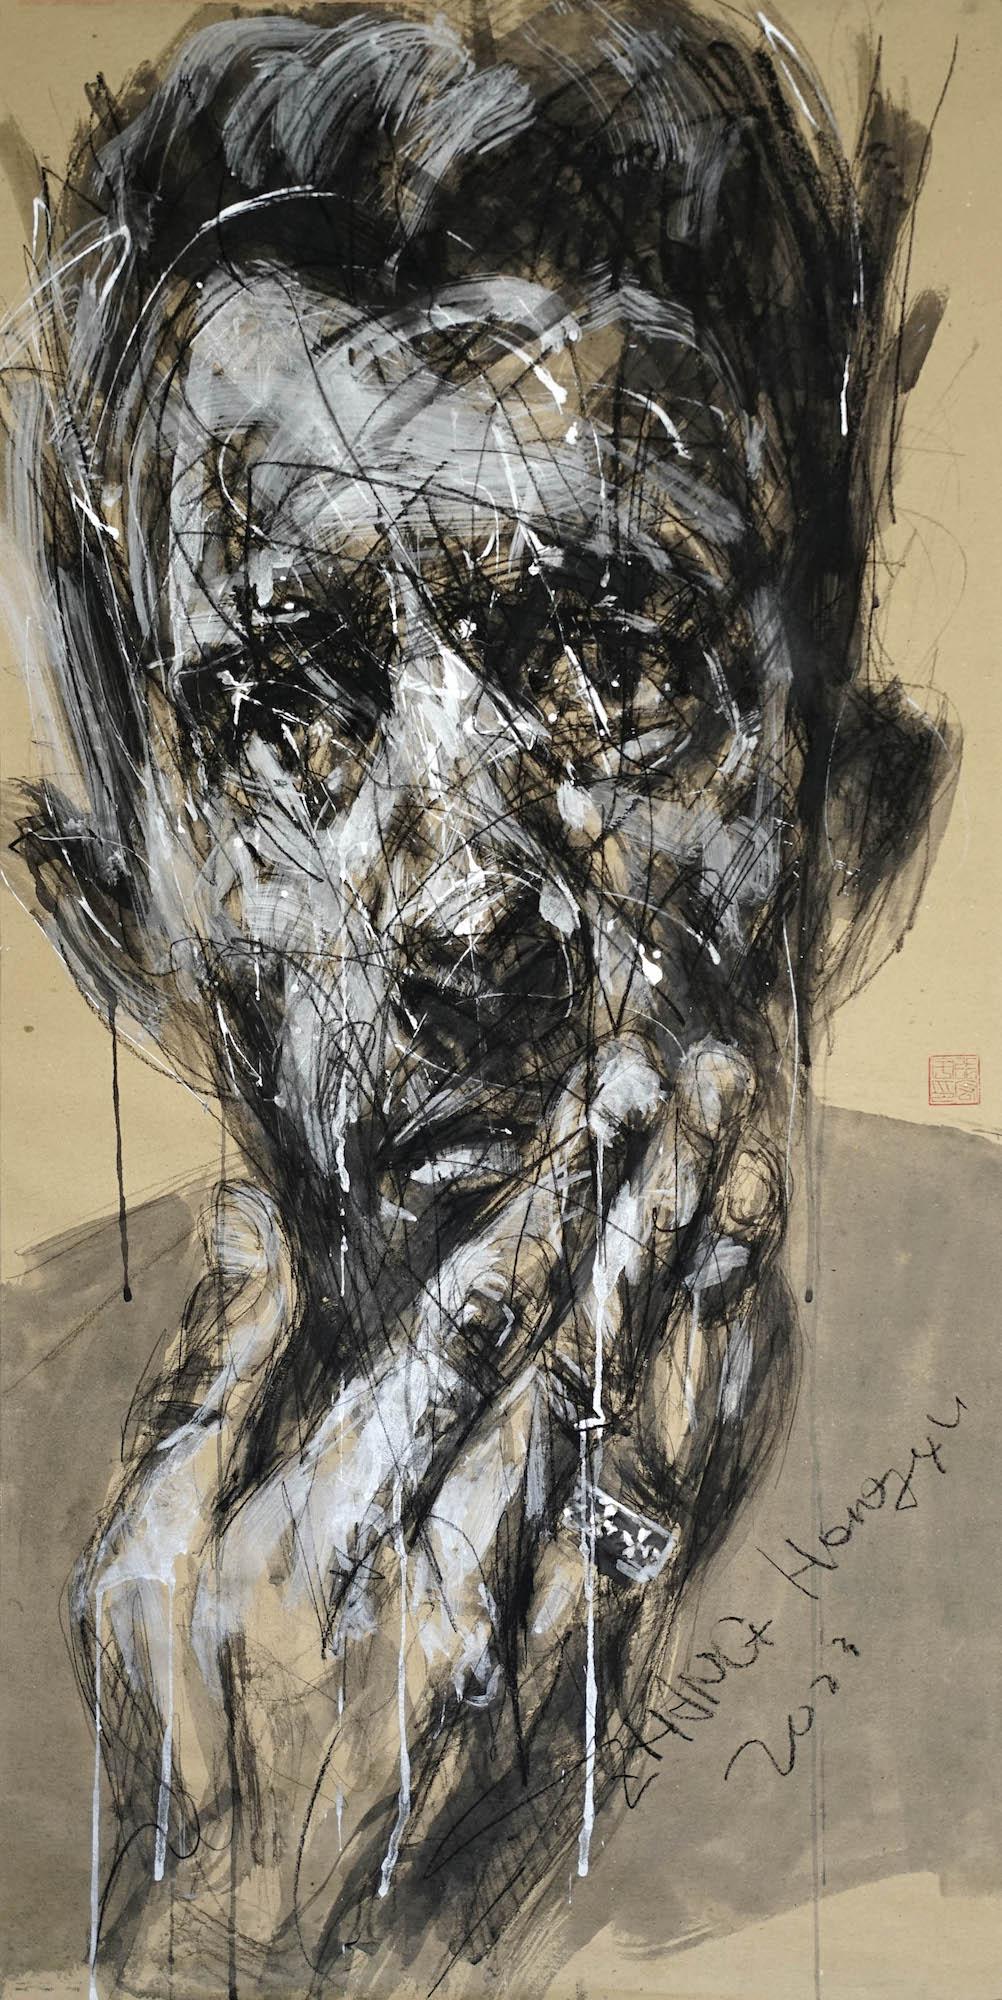 No.215 by Zhang Hongyu - Contemporary portrait painting, abstract, face